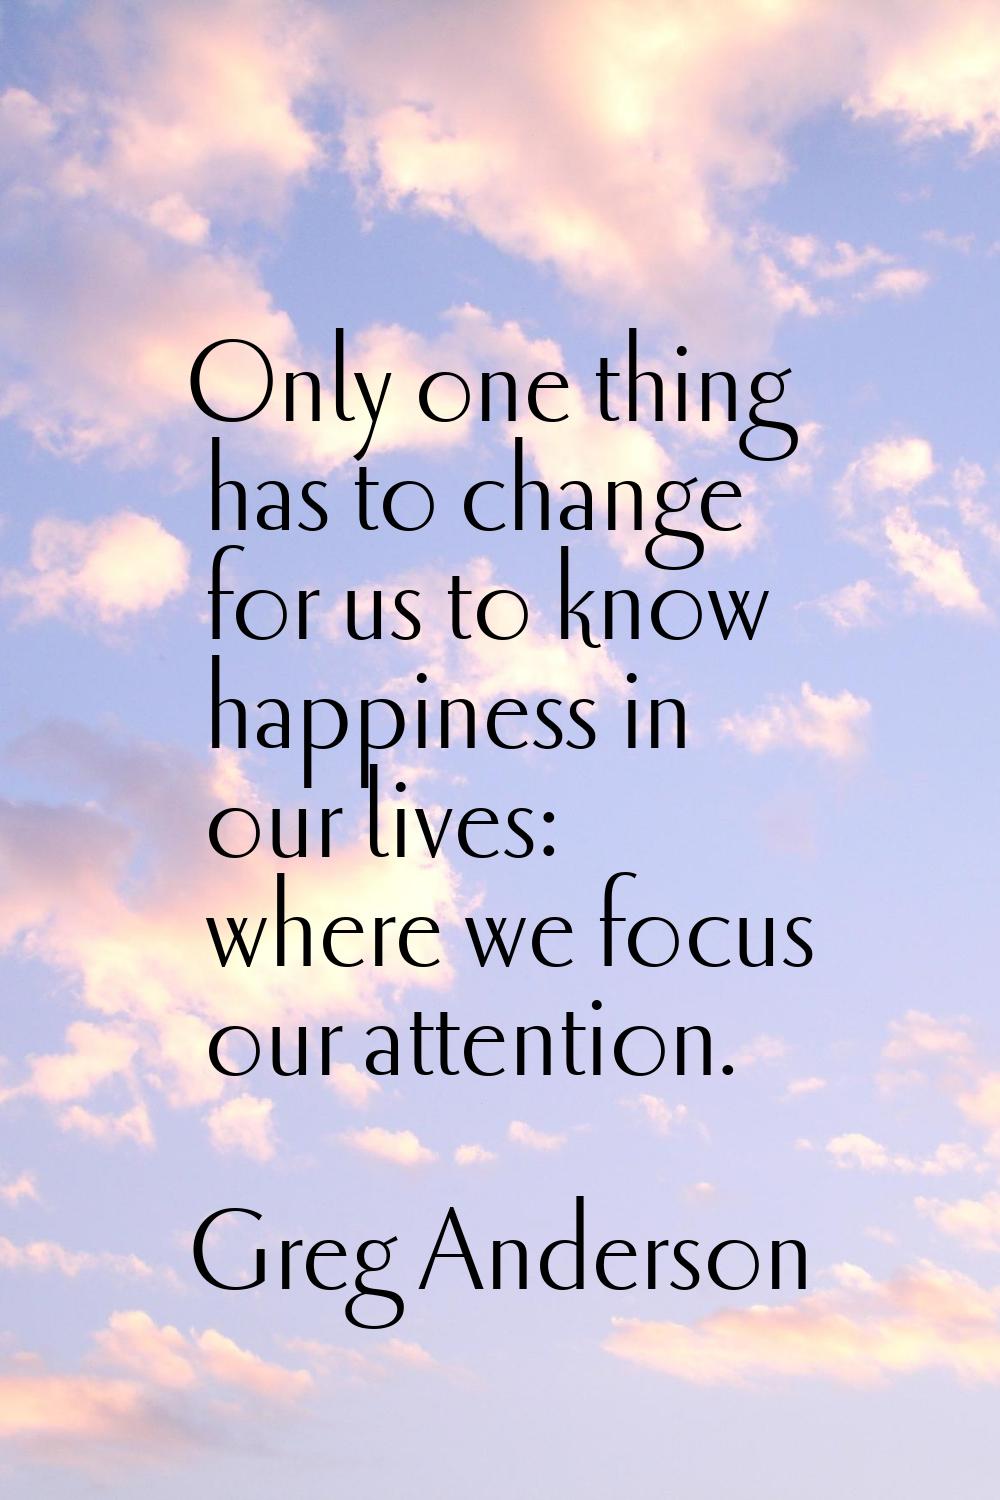 Only one thing has to change for us to know happiness in our lives: where we focus our attention.